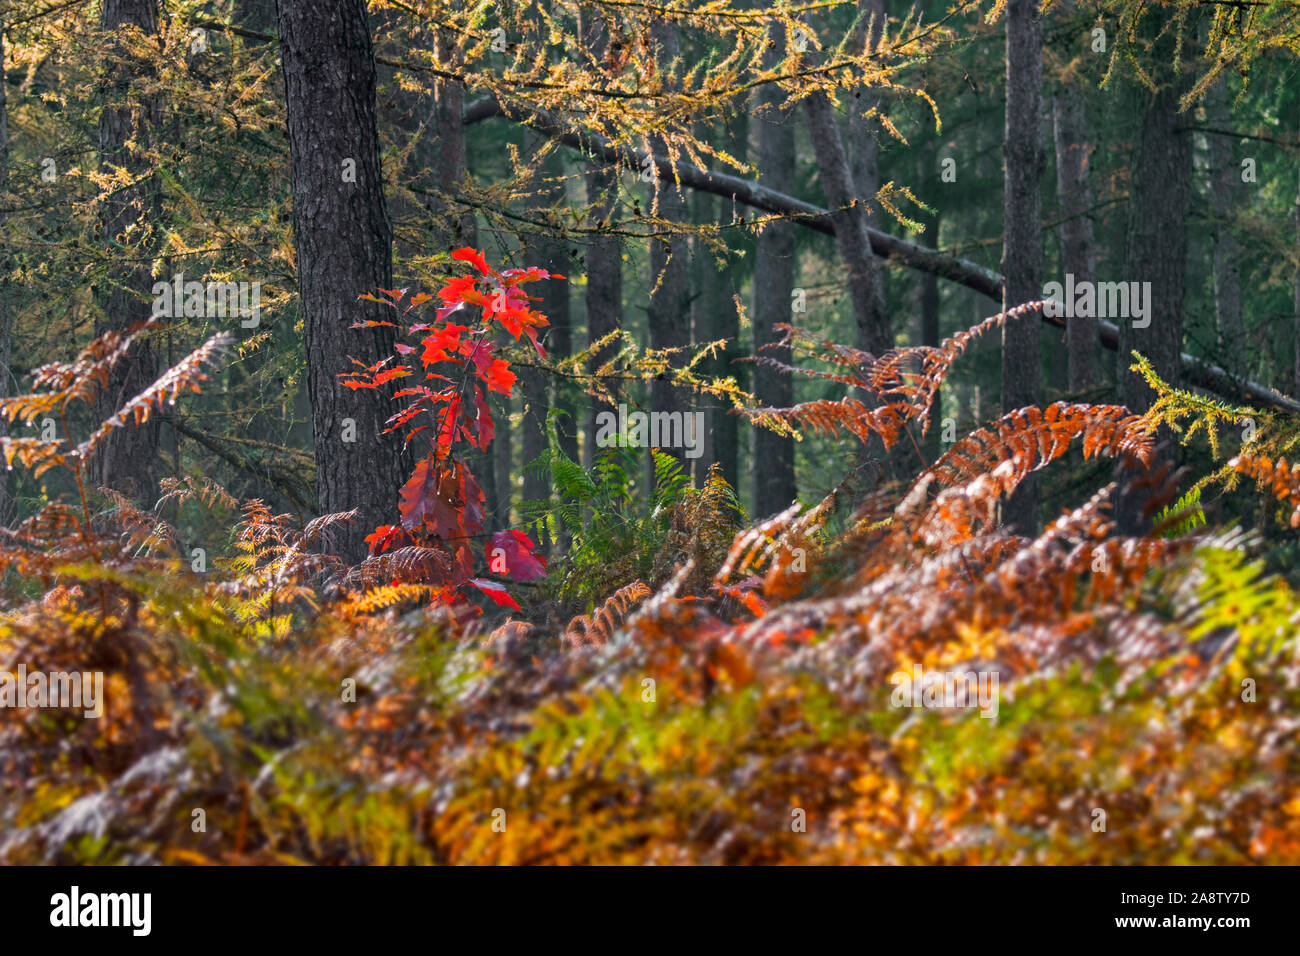 Northern red oak / champion oak (Quercus rubra / Quercus borealis) sapling showing red autumn colours in mixed forest with bracken in the fall Stock Photo